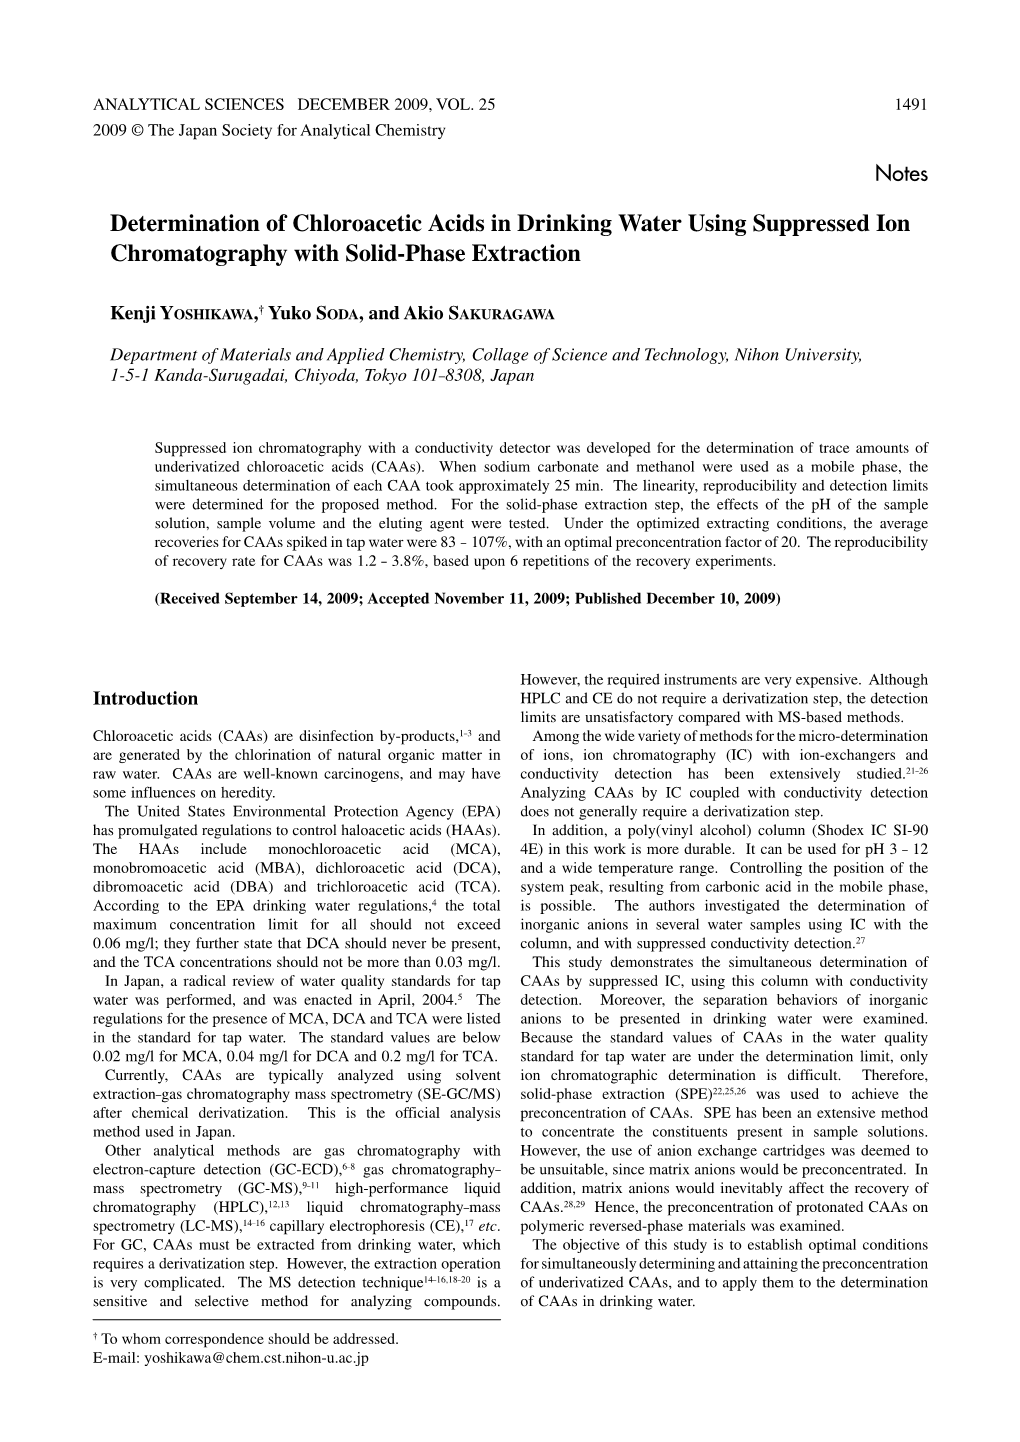 Determination of Chloroacetic Acids in Drinking Water Using Suppressed Ion Chromatography with Solid-Phase Extraction